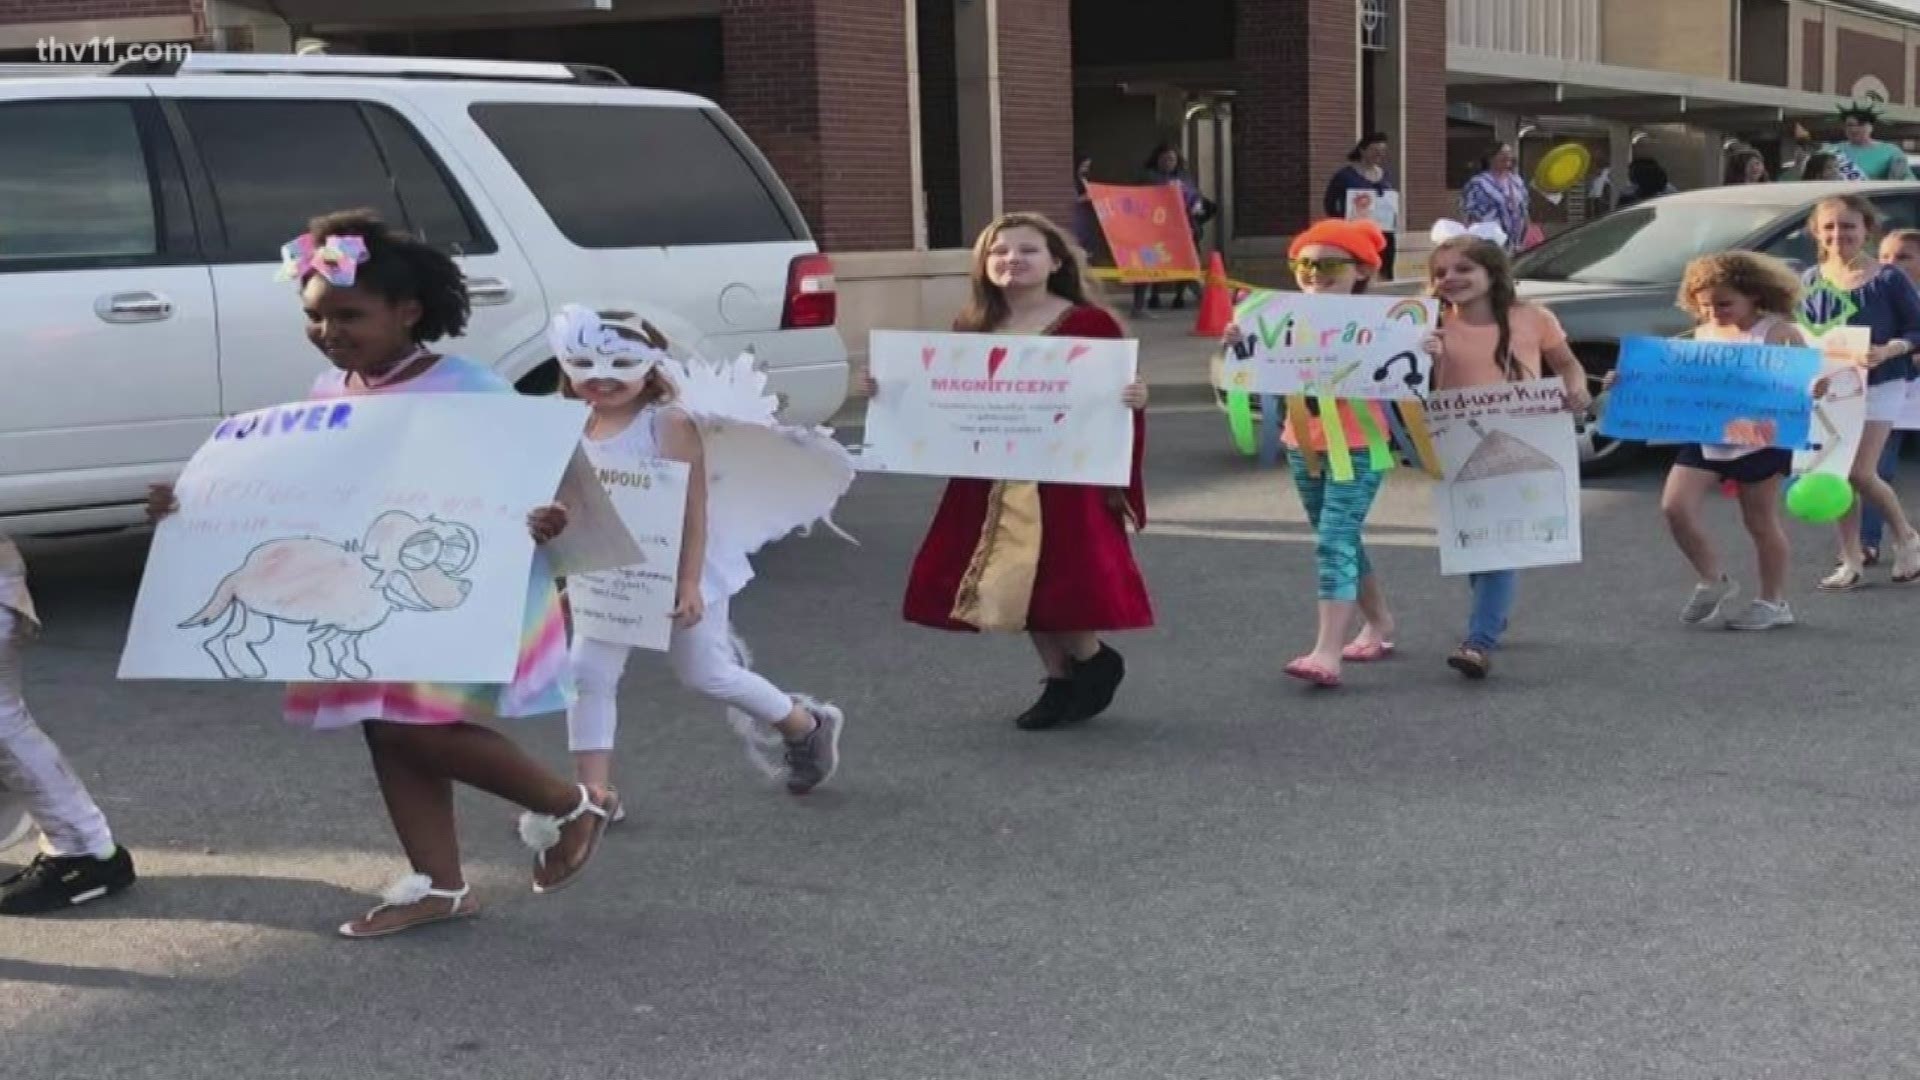 Bet you've never seen a school do this. At Carolyn lewis Elementary in Conway, every child was given a word. They then had to come up with a costume based on that word.